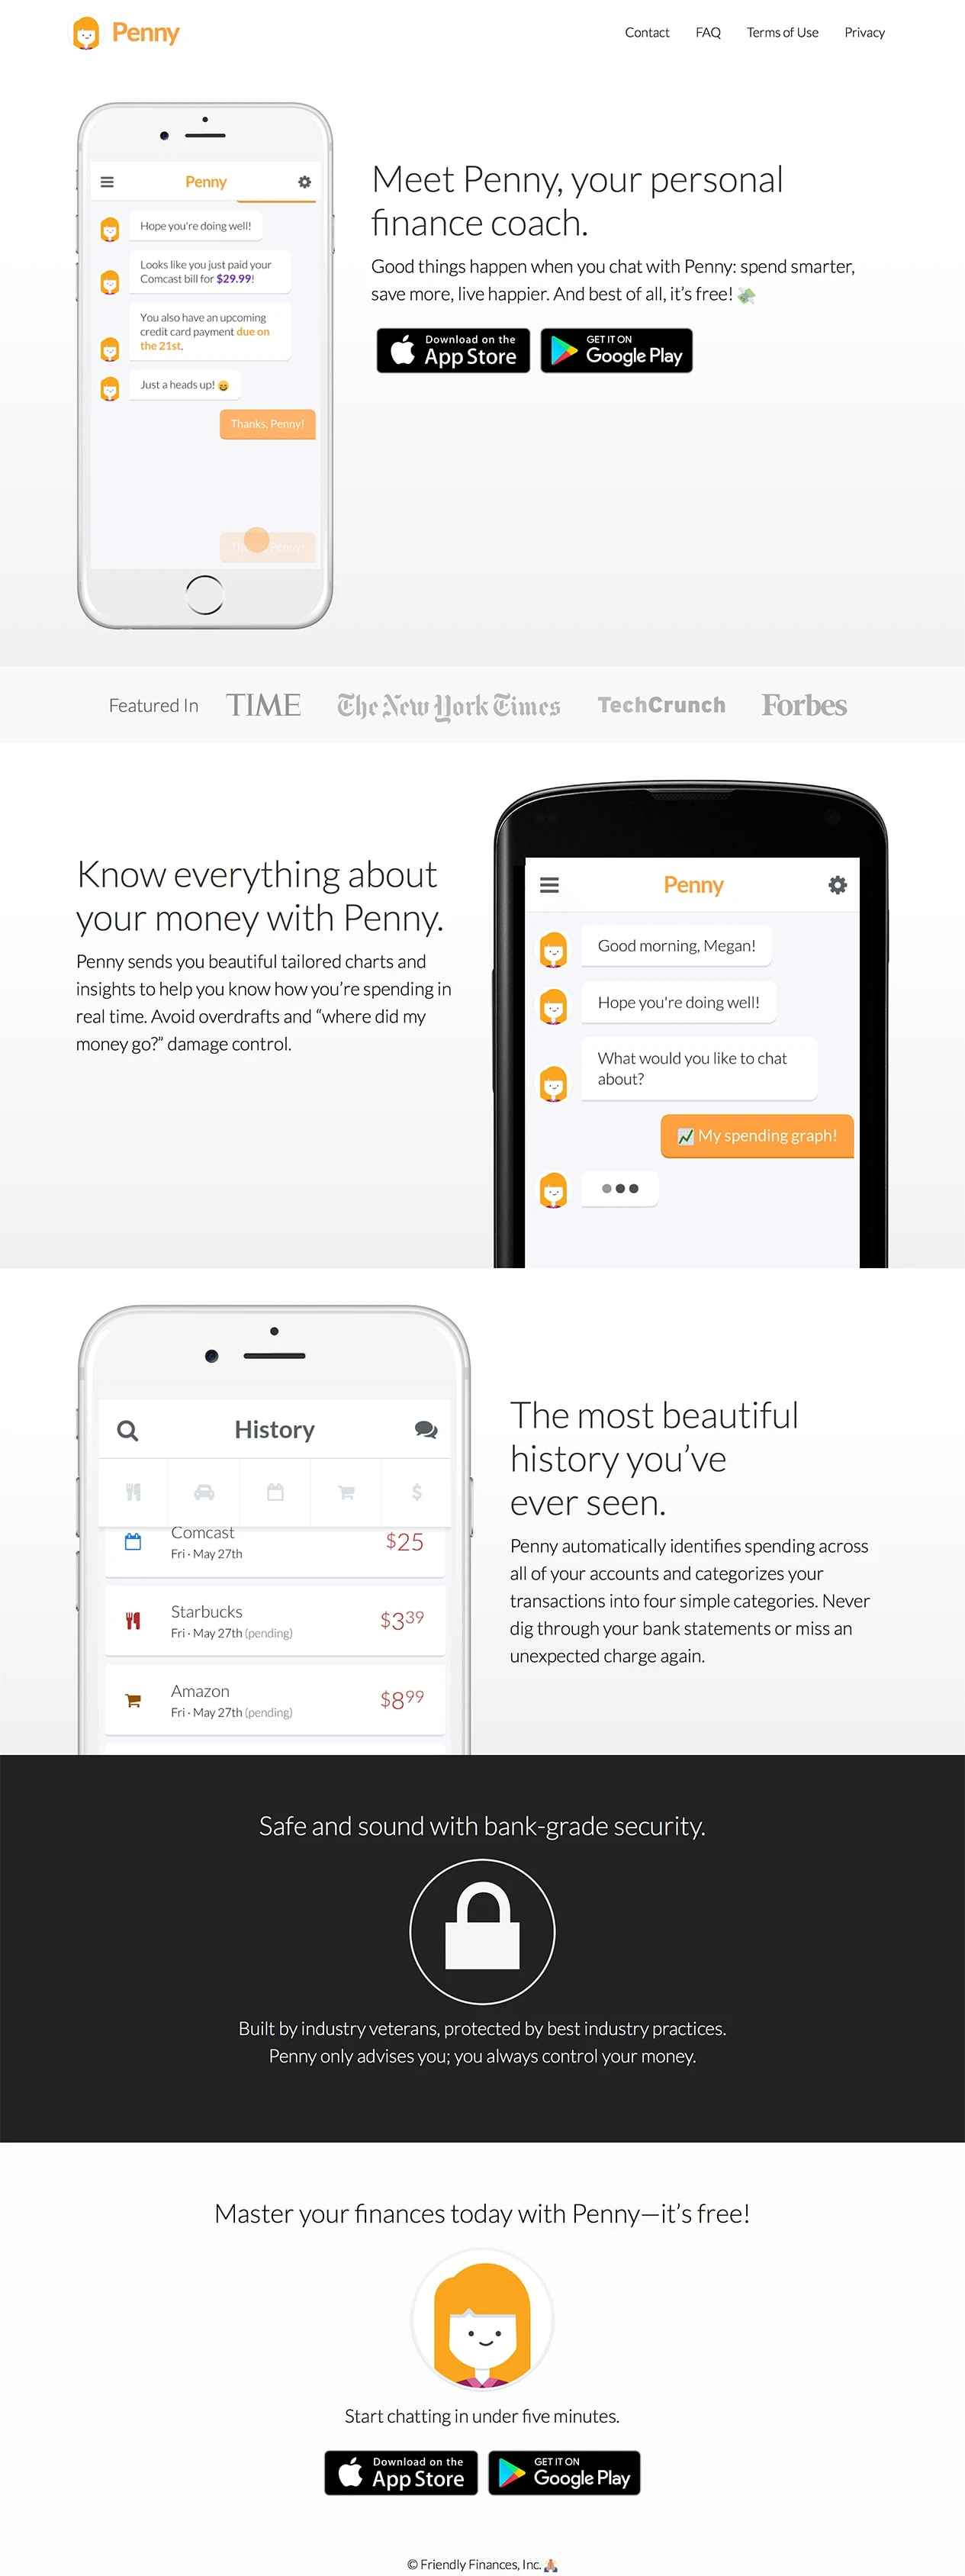 Penny Landing Page Example: Meet Penny, your personal finance coach. Spend smarter, save more, live happier.